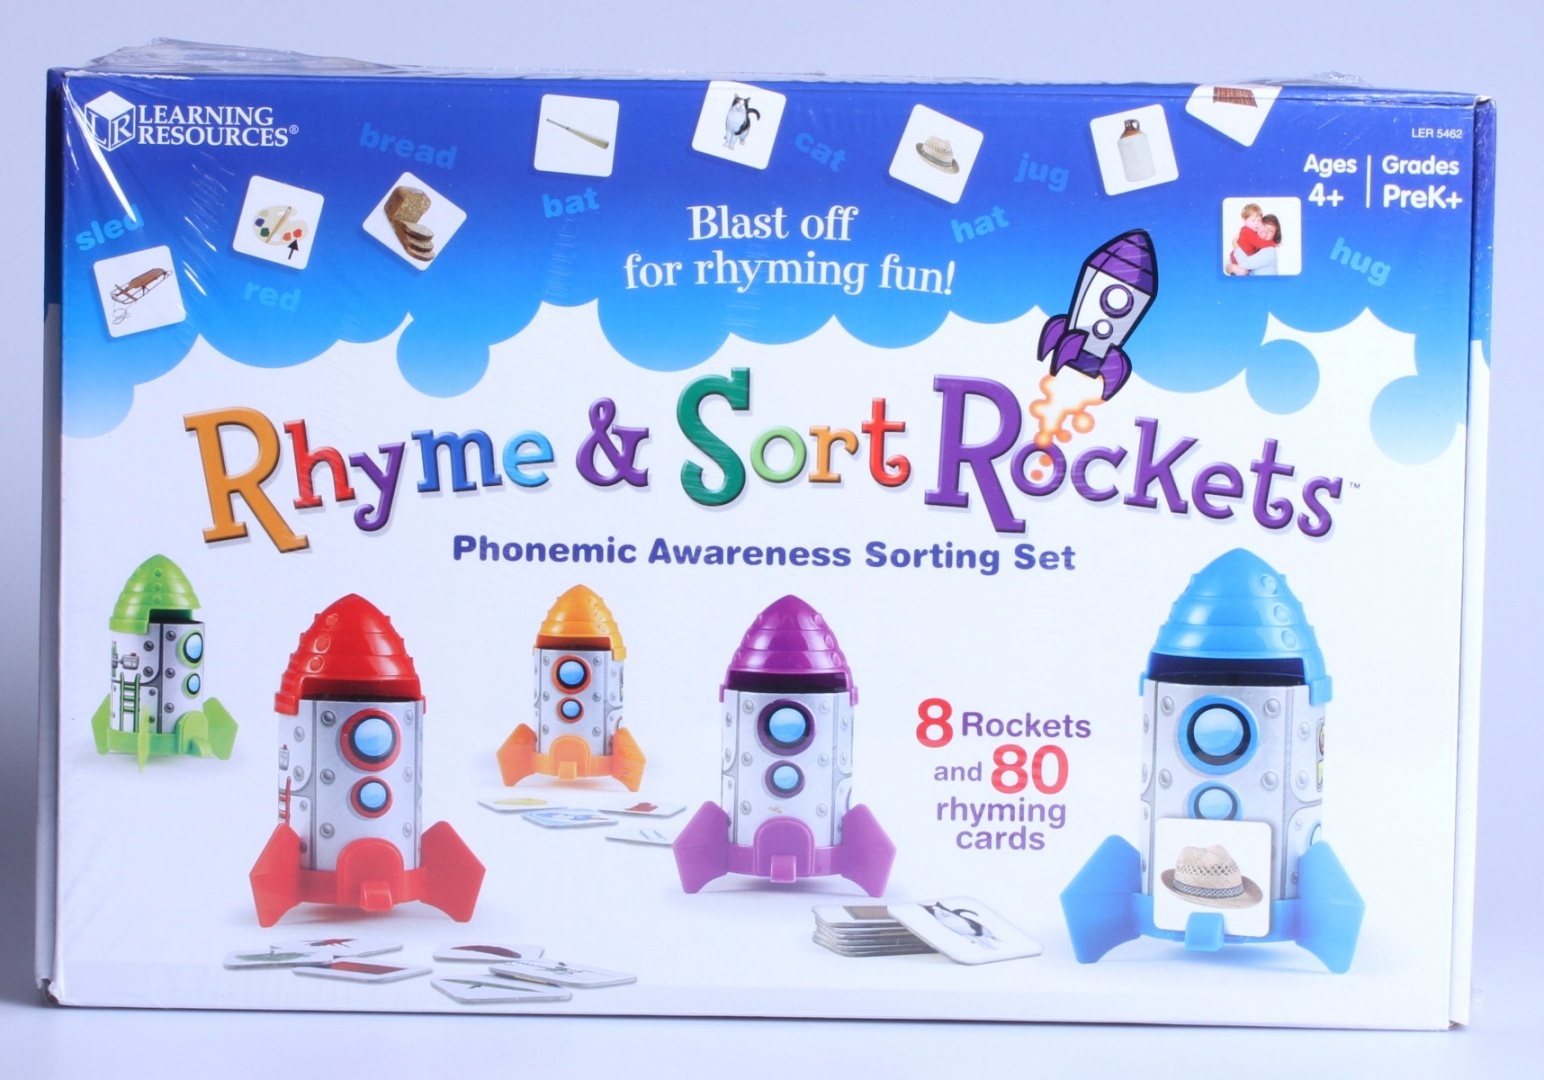 Rhyme and Sort Rockets